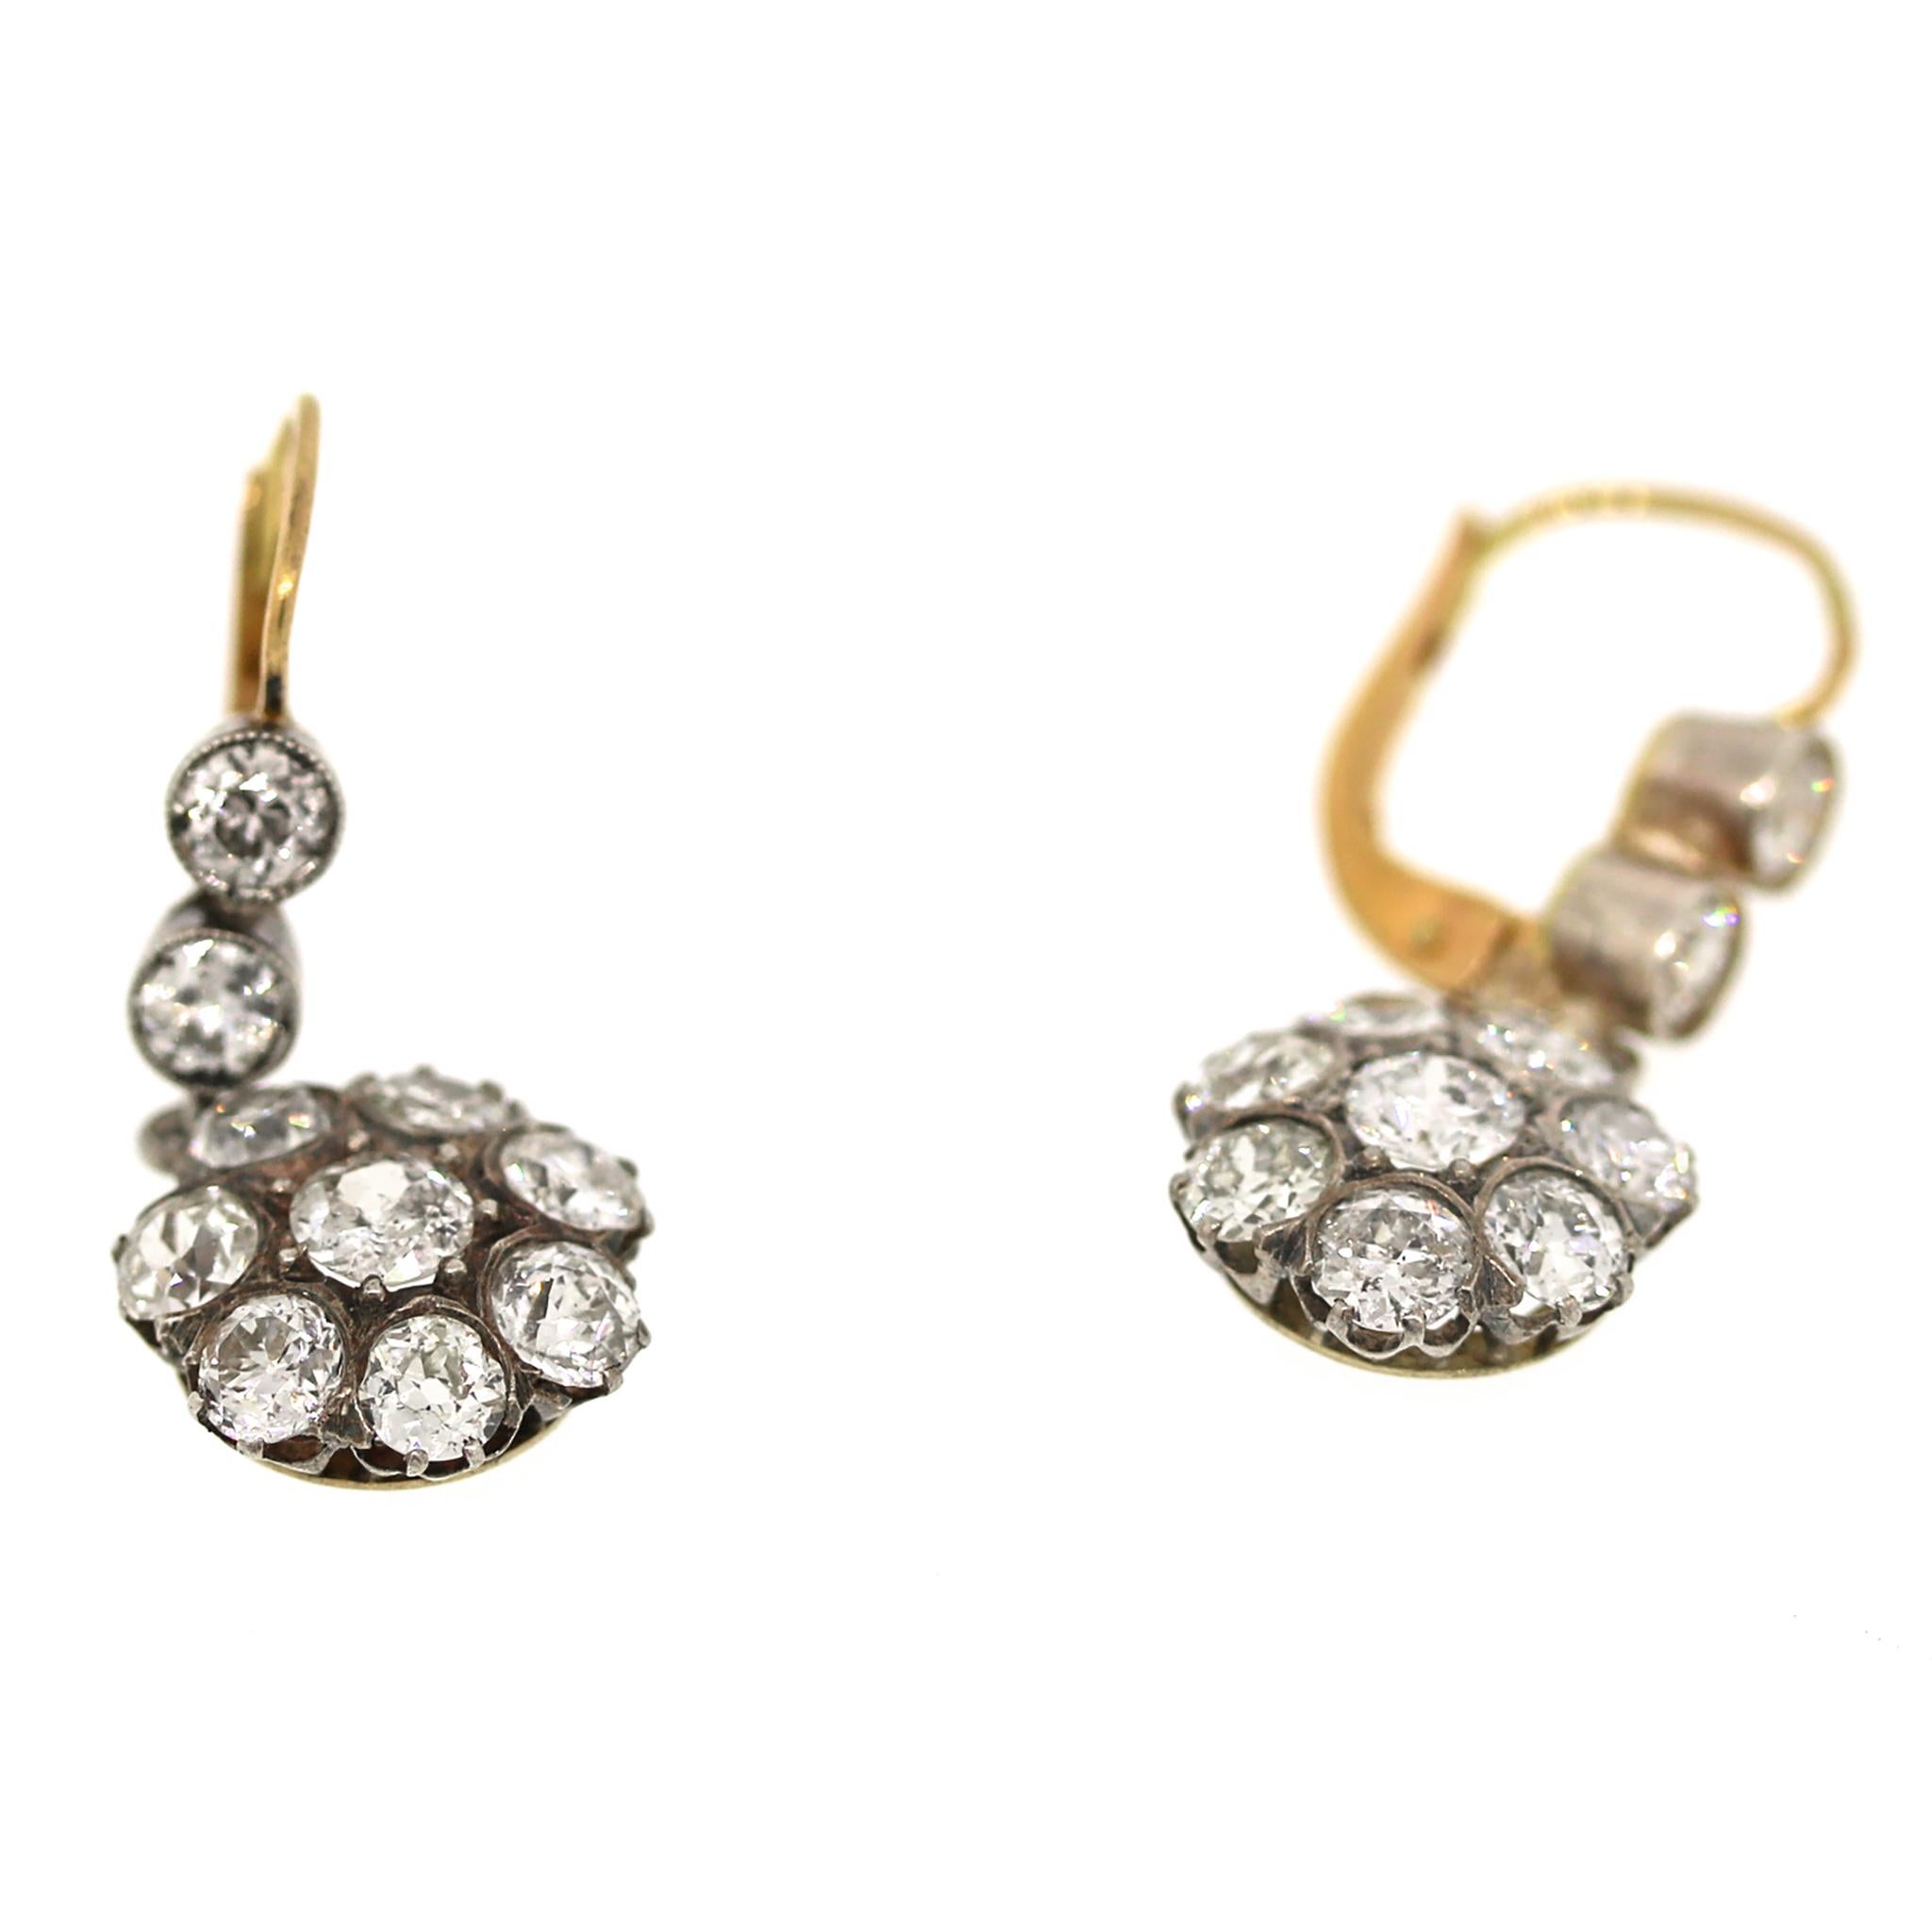 An incredible pair of diamond cluster earrings from the Victorian era.

14 kt Yellow Gold
Diamond: 2 ct twd
Old Mine Cut
Length: 1 inch